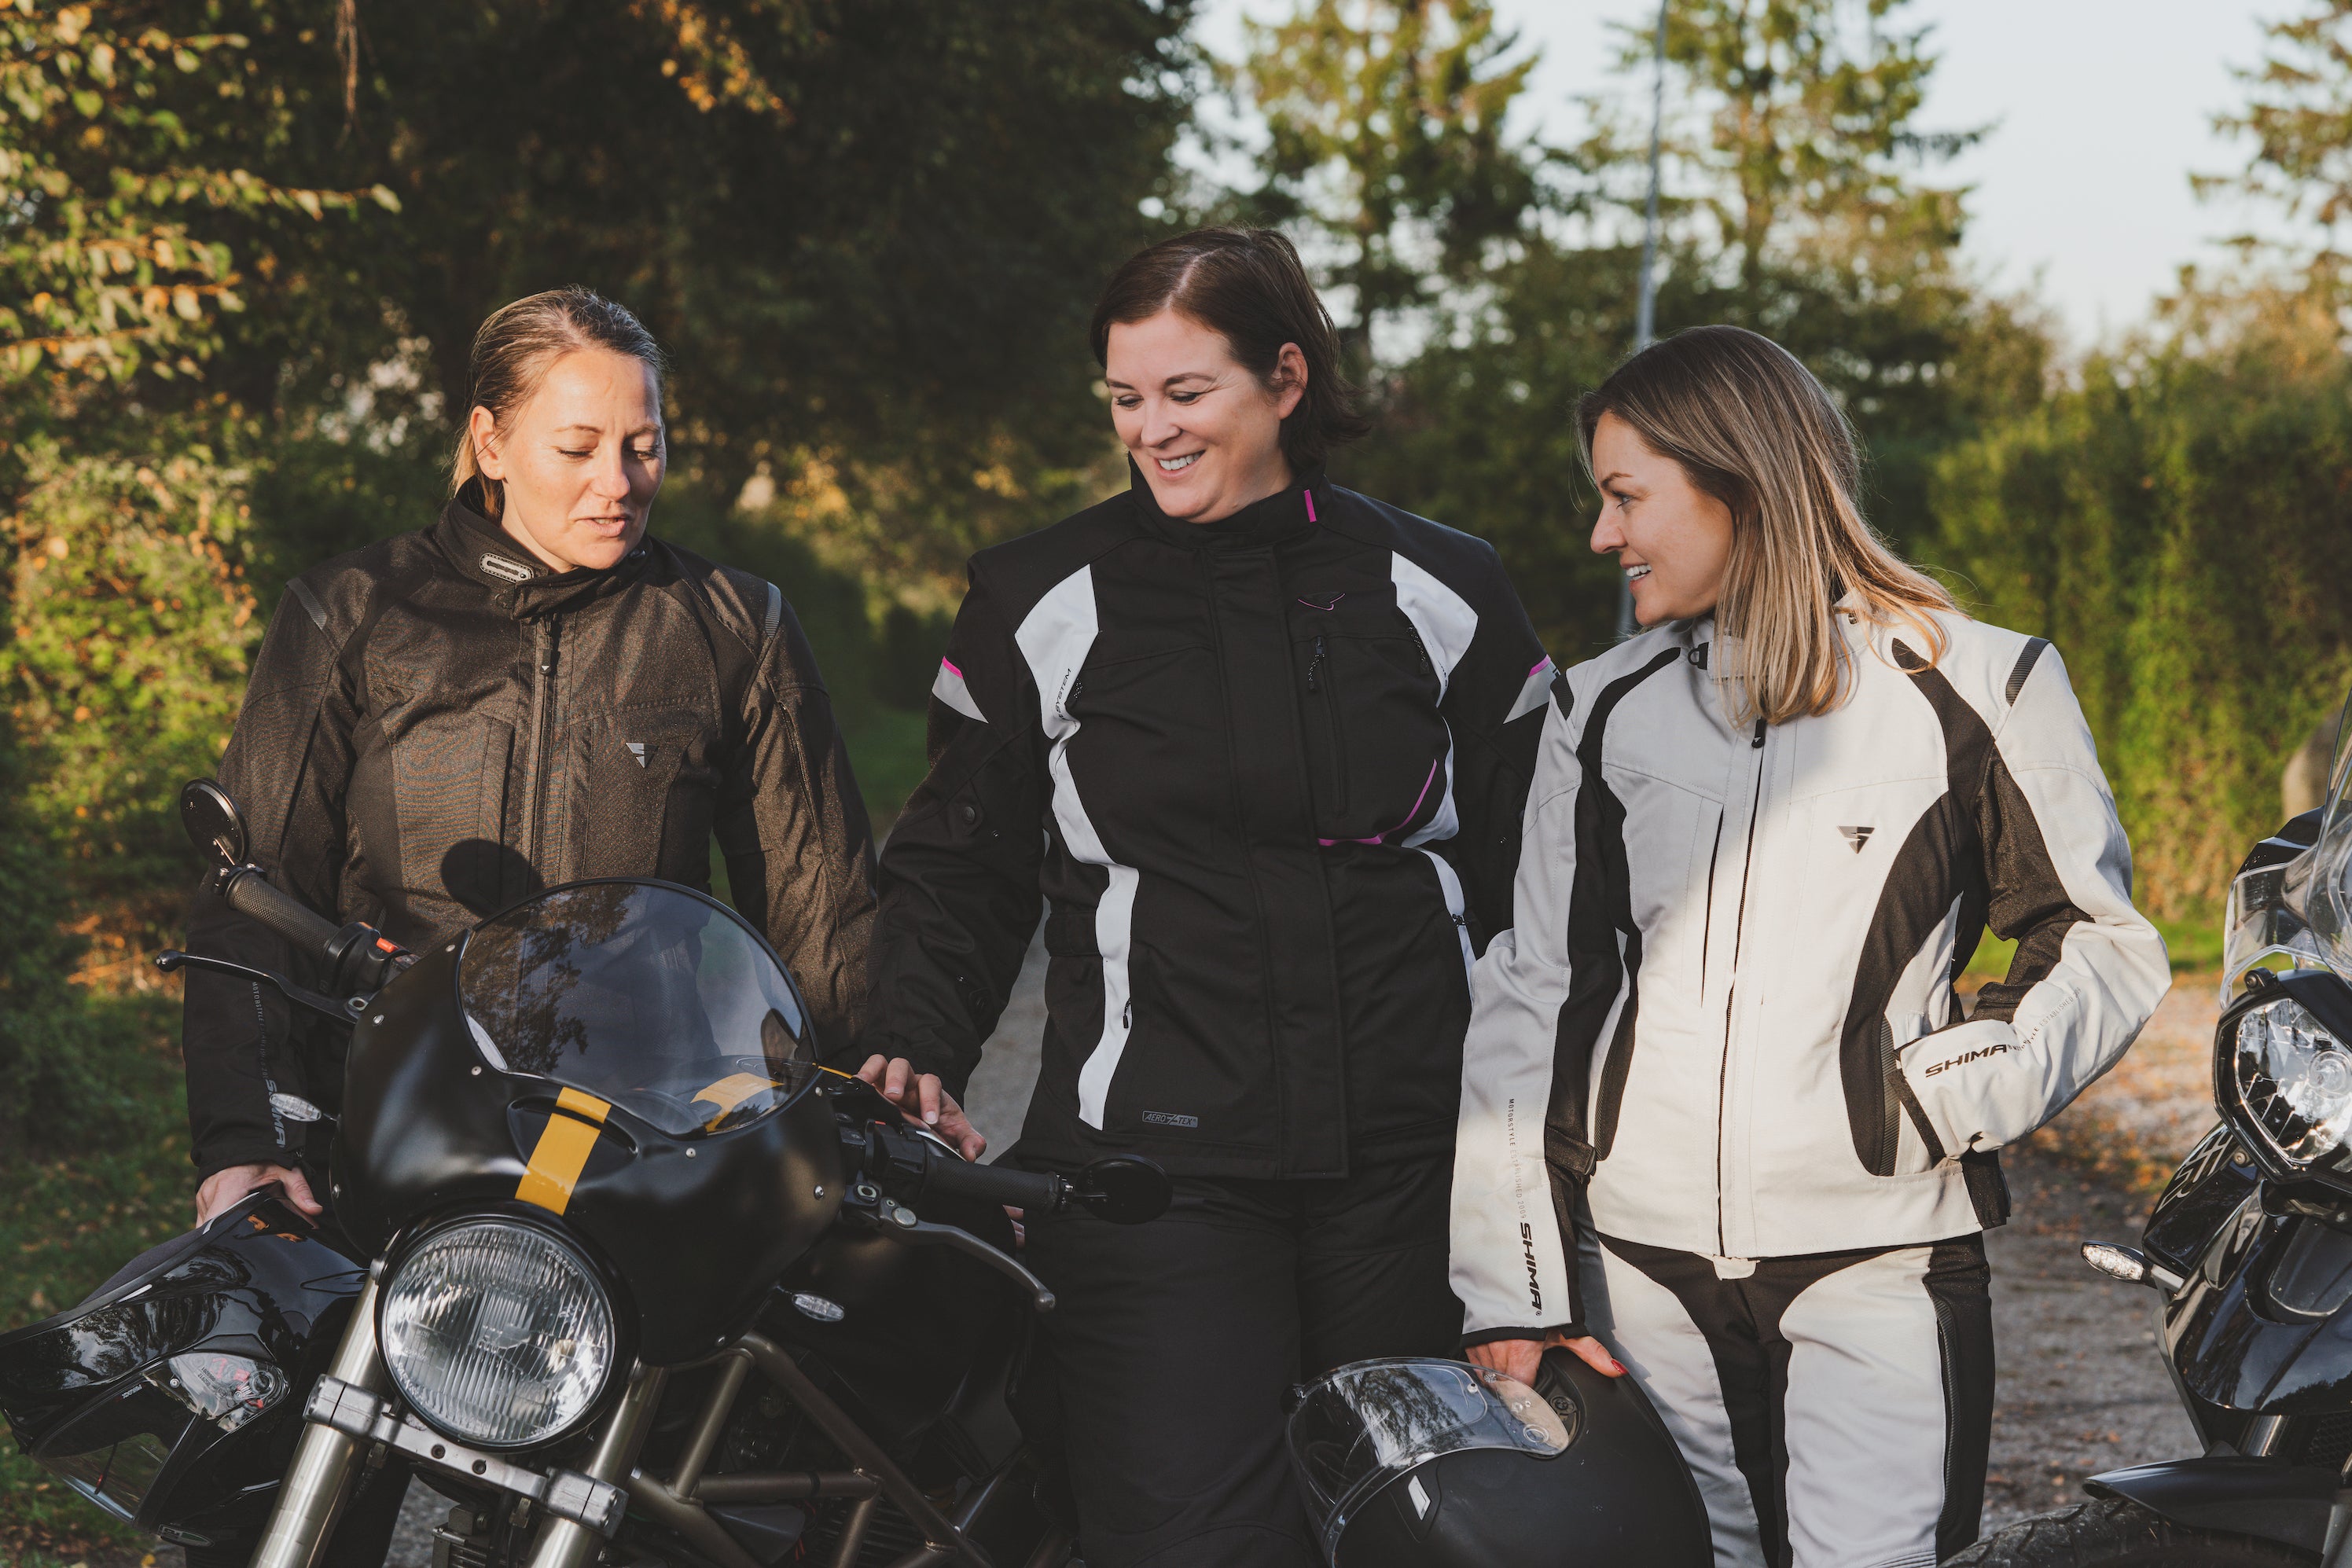 Three women wearing lady motorcycle clothes standing by motorcycles and chatting 